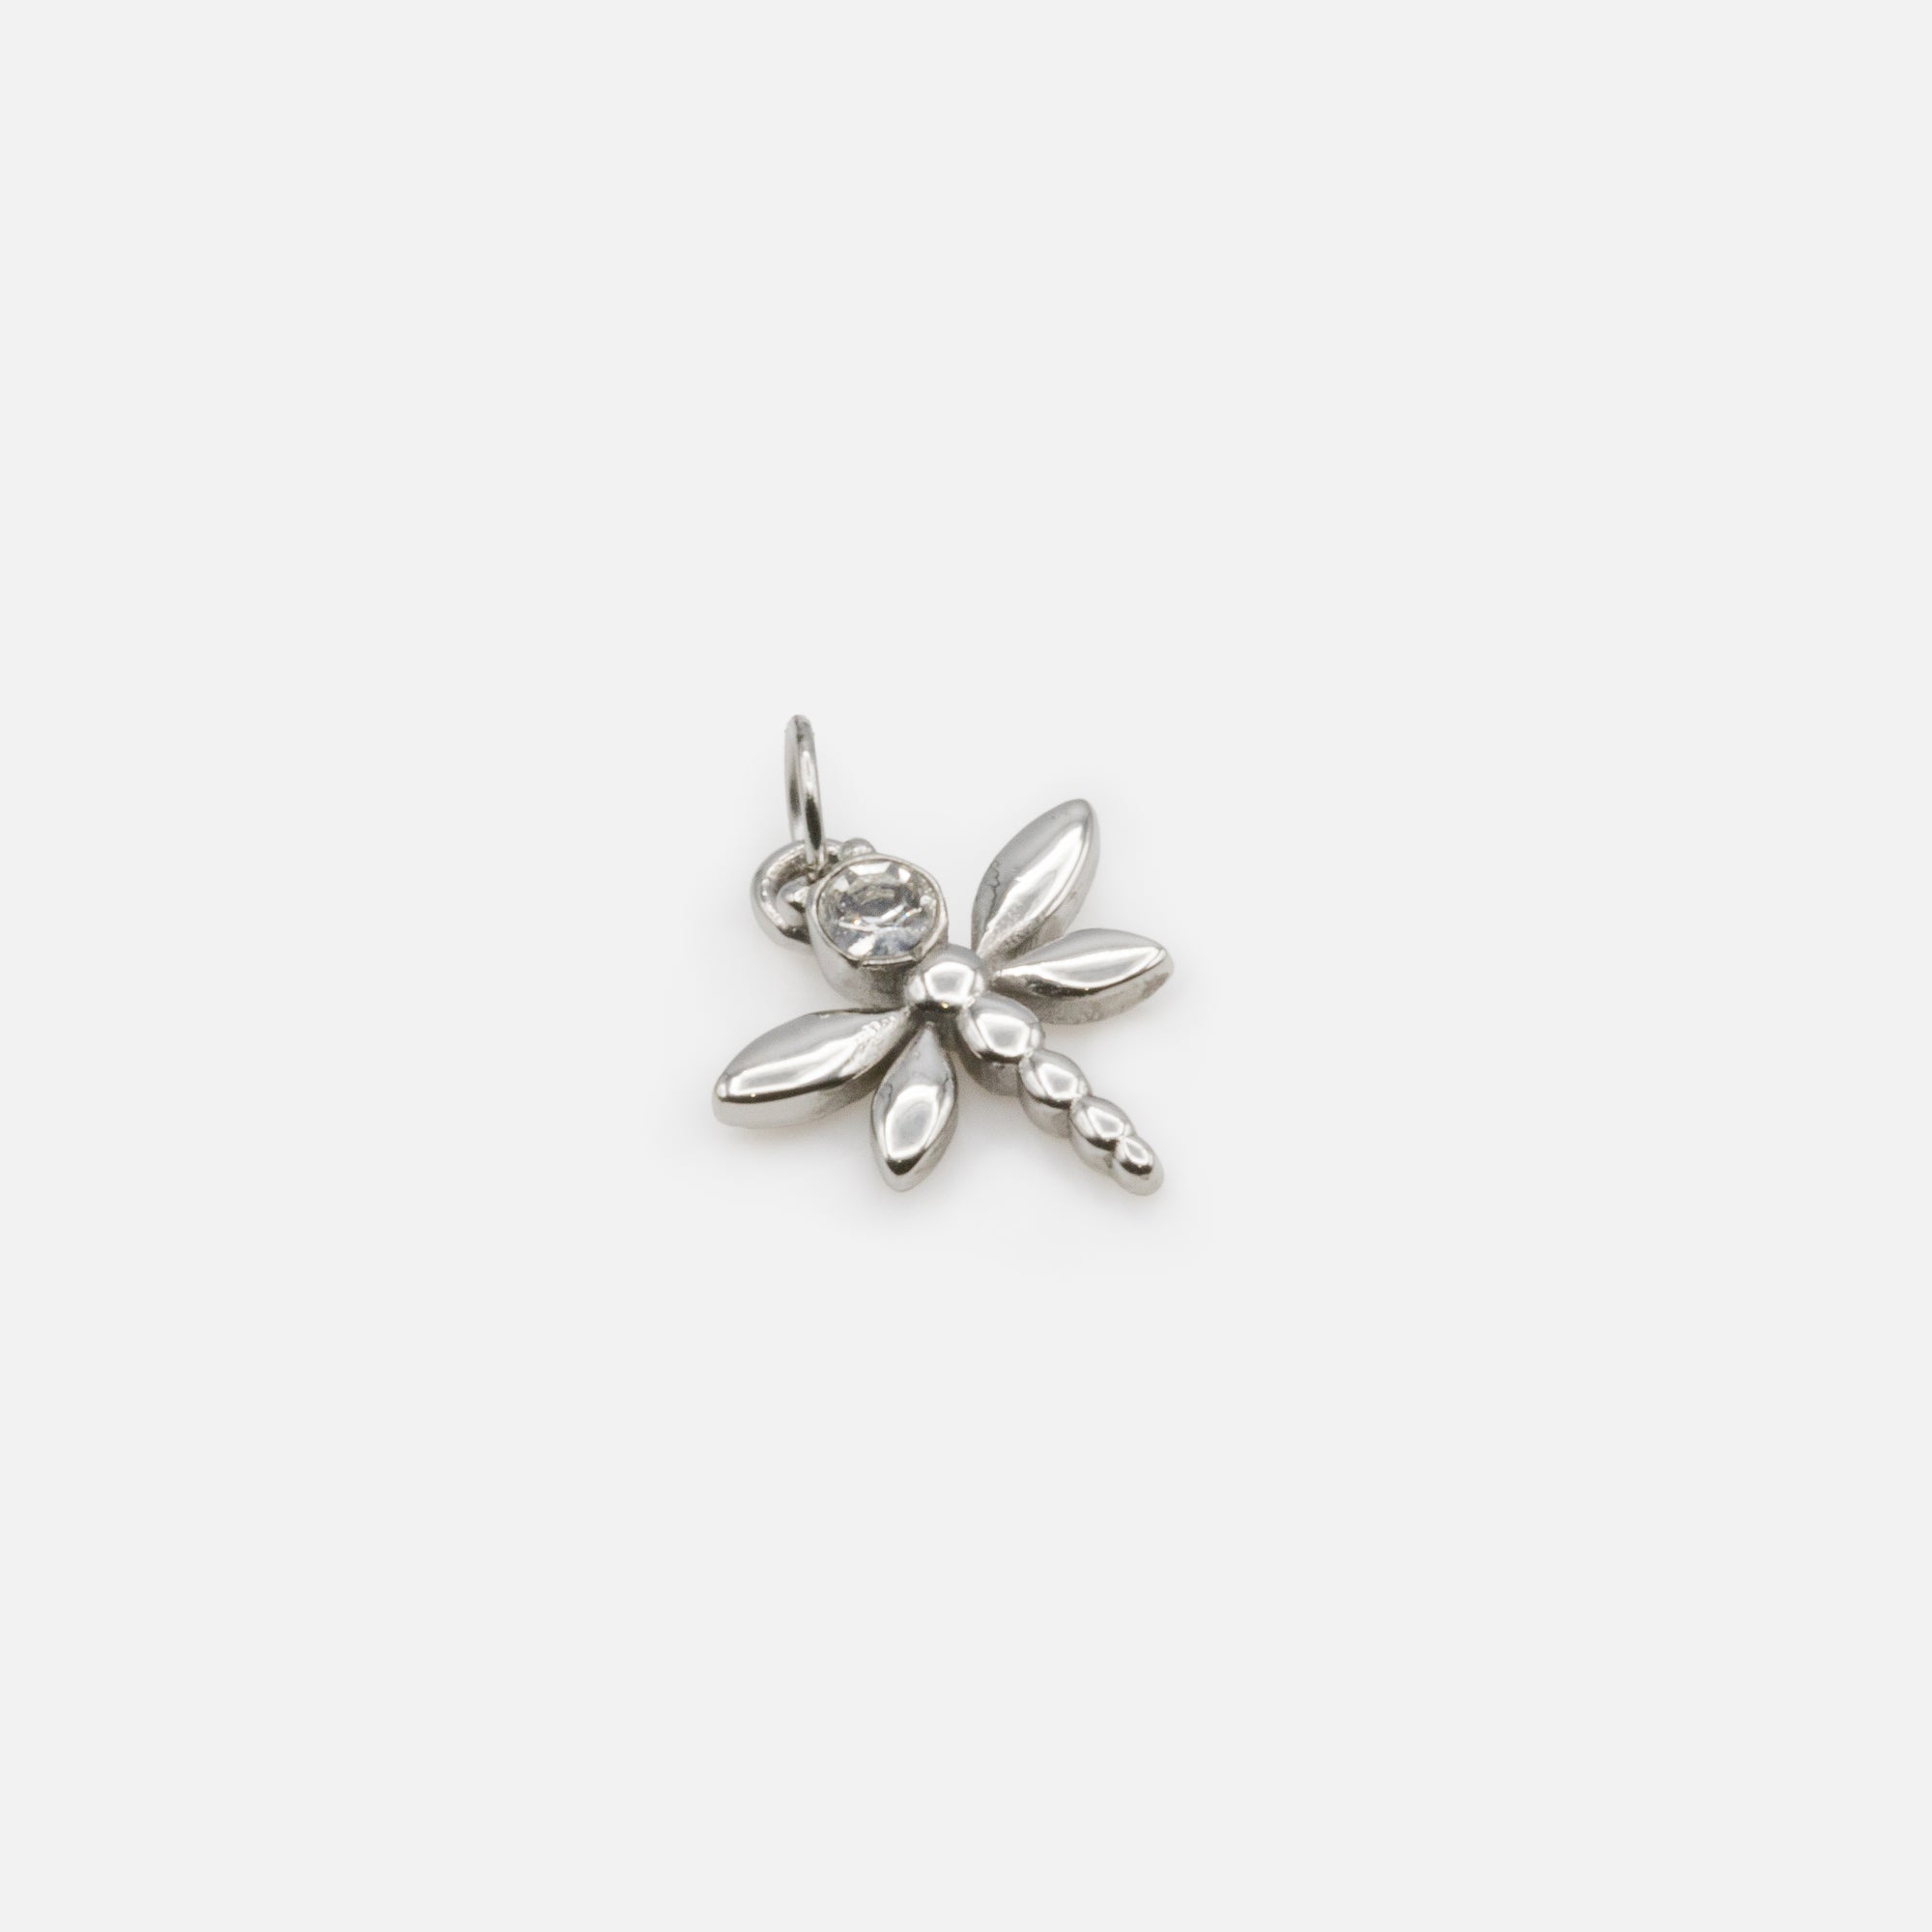 Dragonfly silvered charm in stainless steel